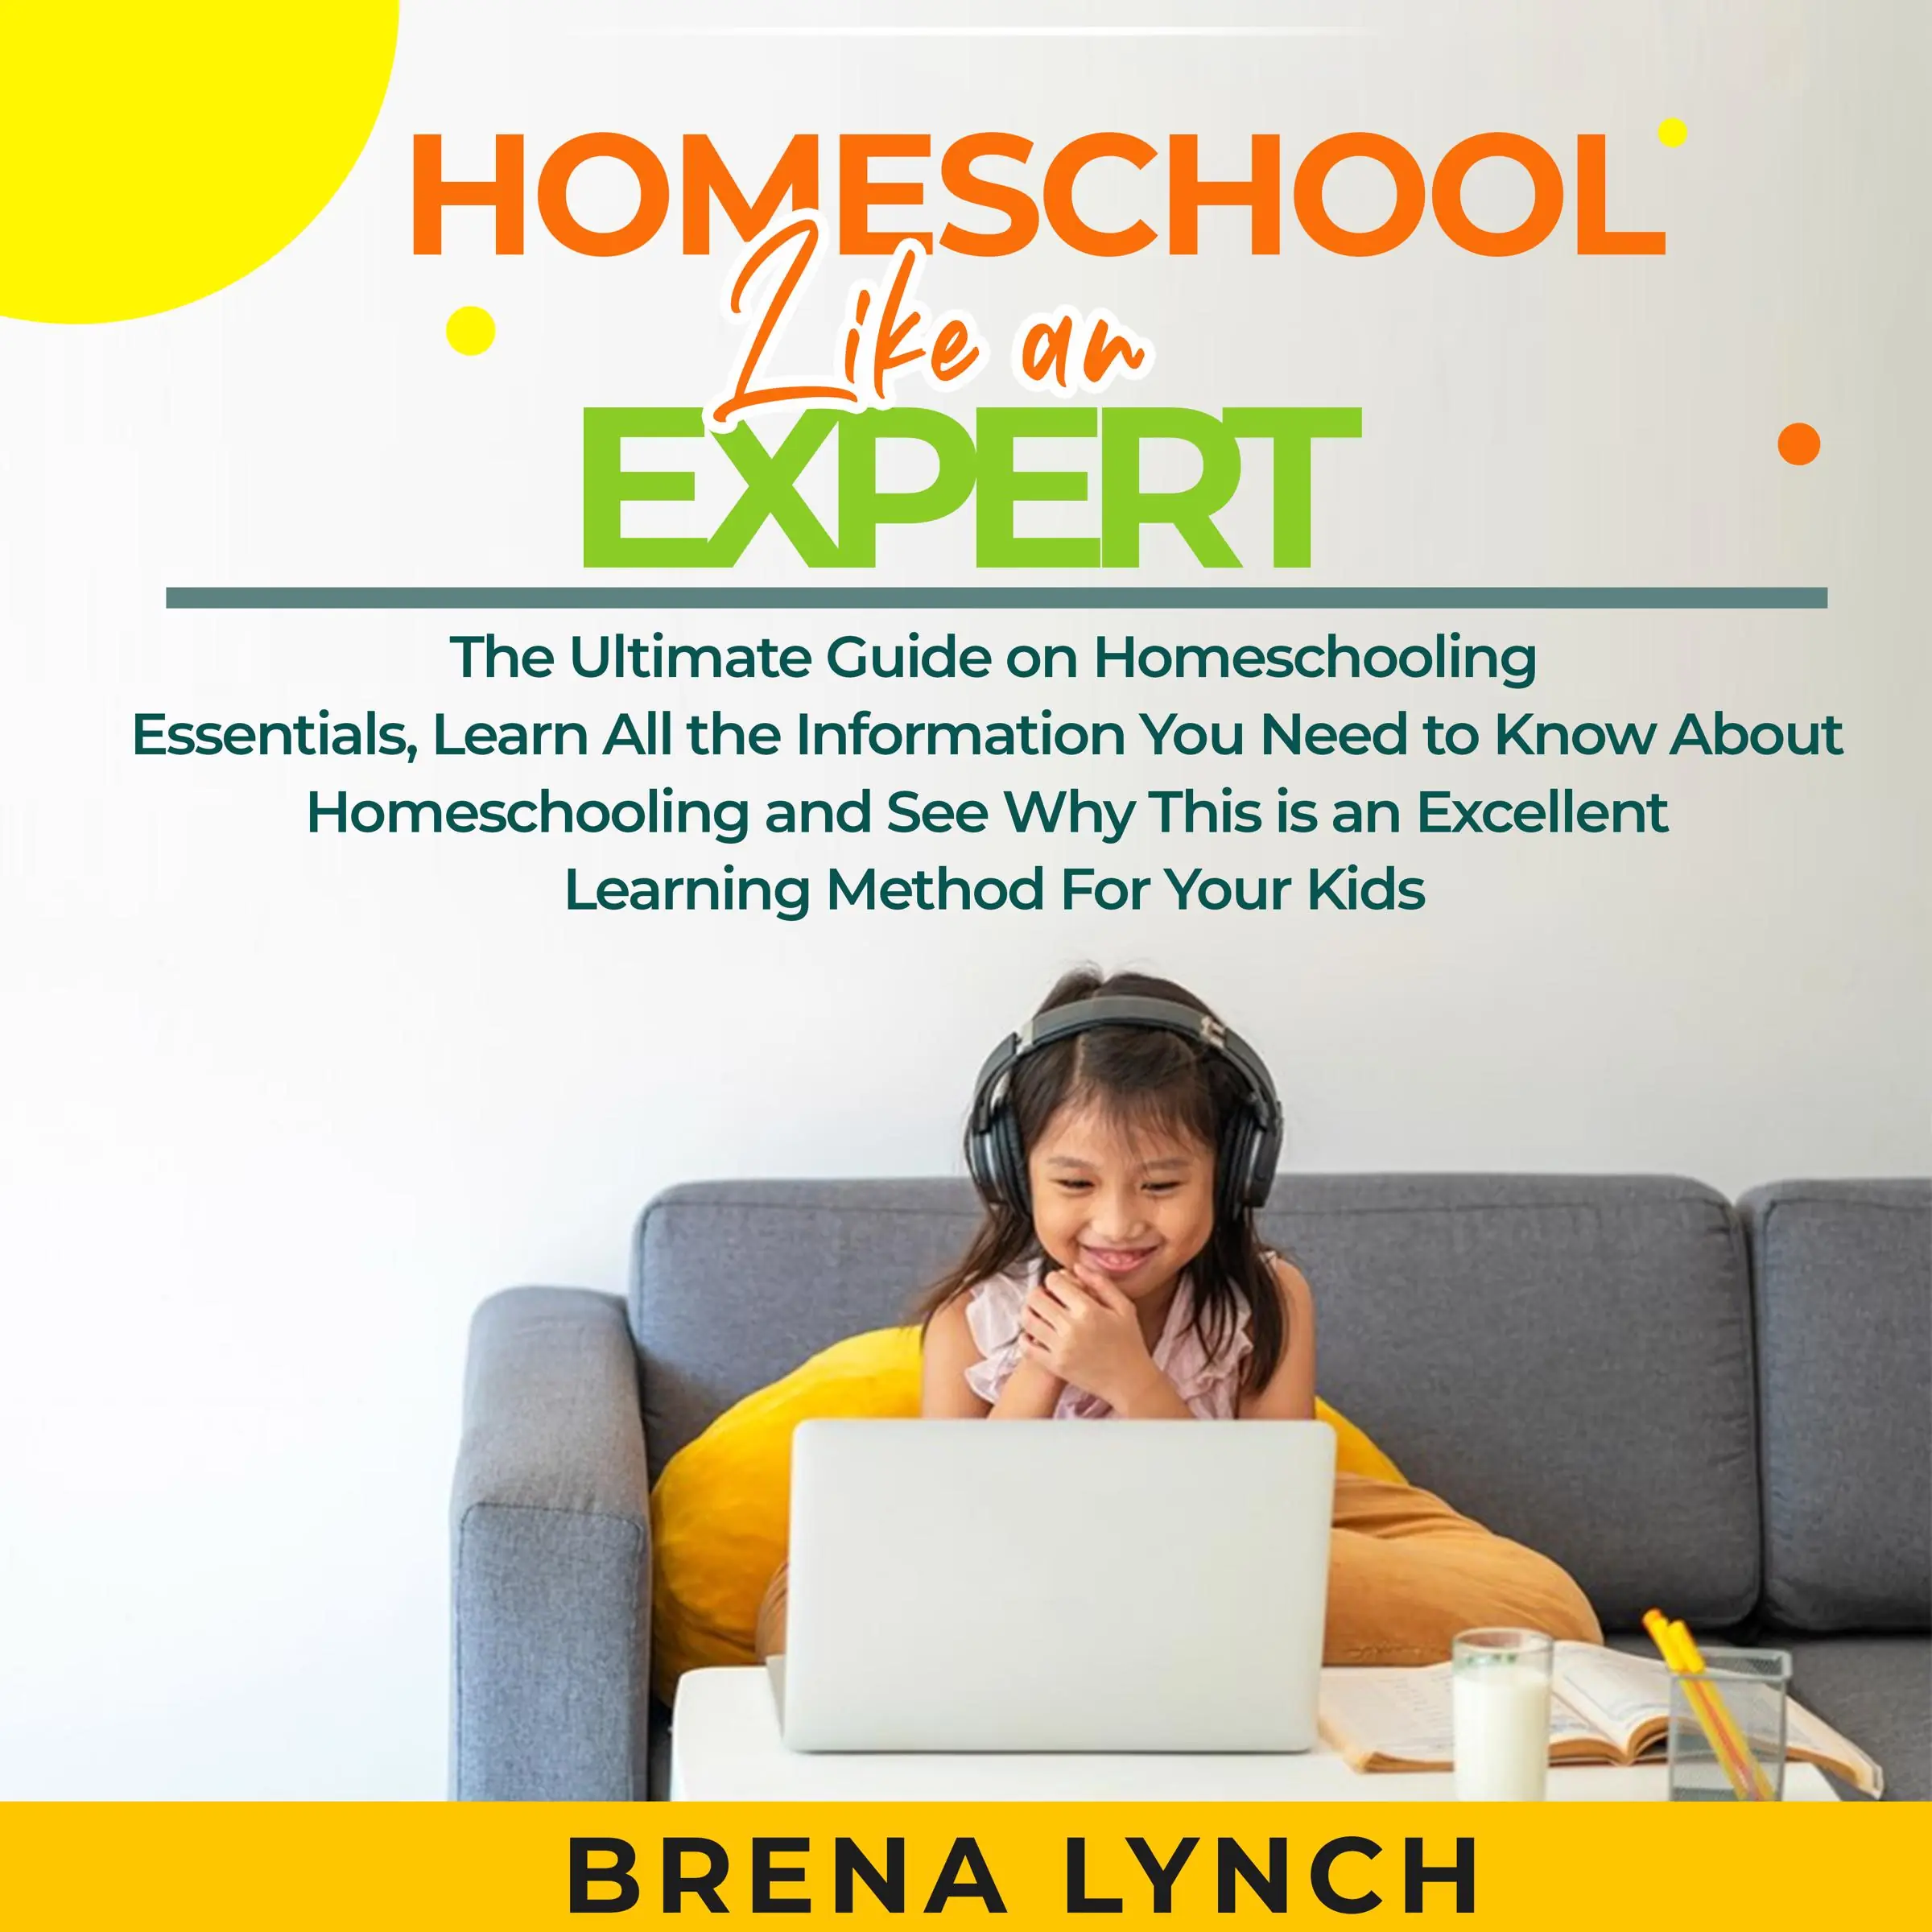 Homeschool Like an Expert: The Ultimate Guide on Homeschooling Essentials, Learn All the Information You Need to Know About Homeschooling and See Why This is an Excellent Learning Method For Your Kids Audiobook by Brena Lynch